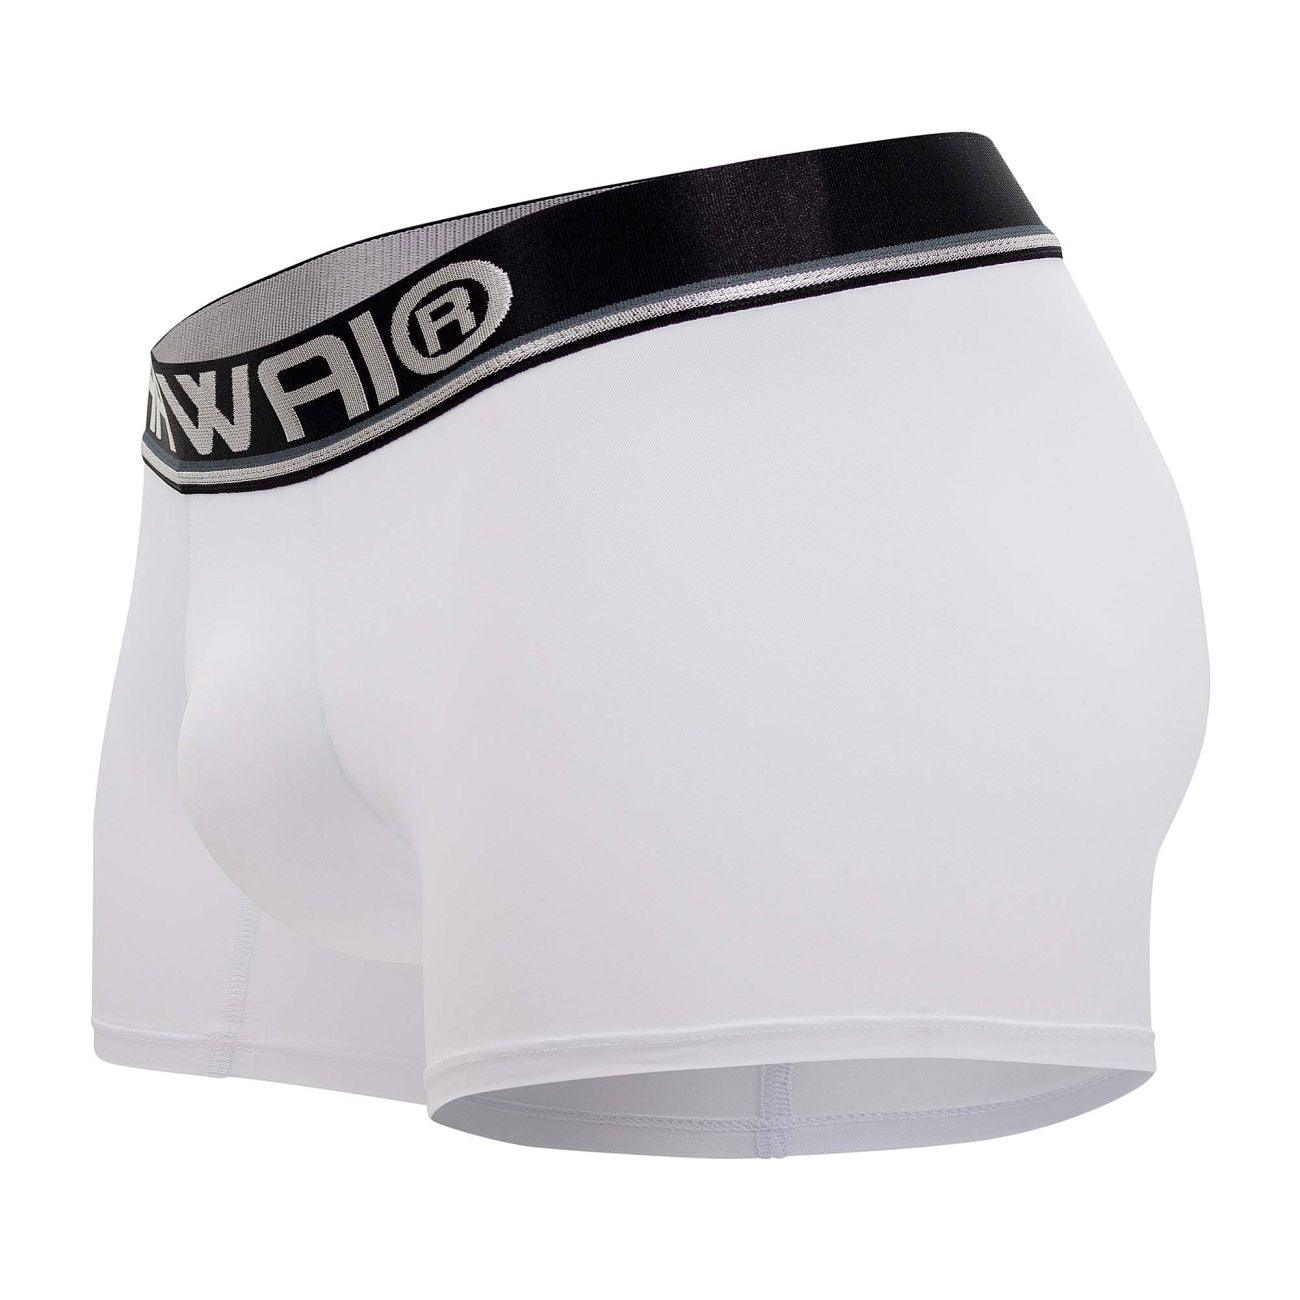 image of product,Microfiber Boxer Briefs - SEXYEONE